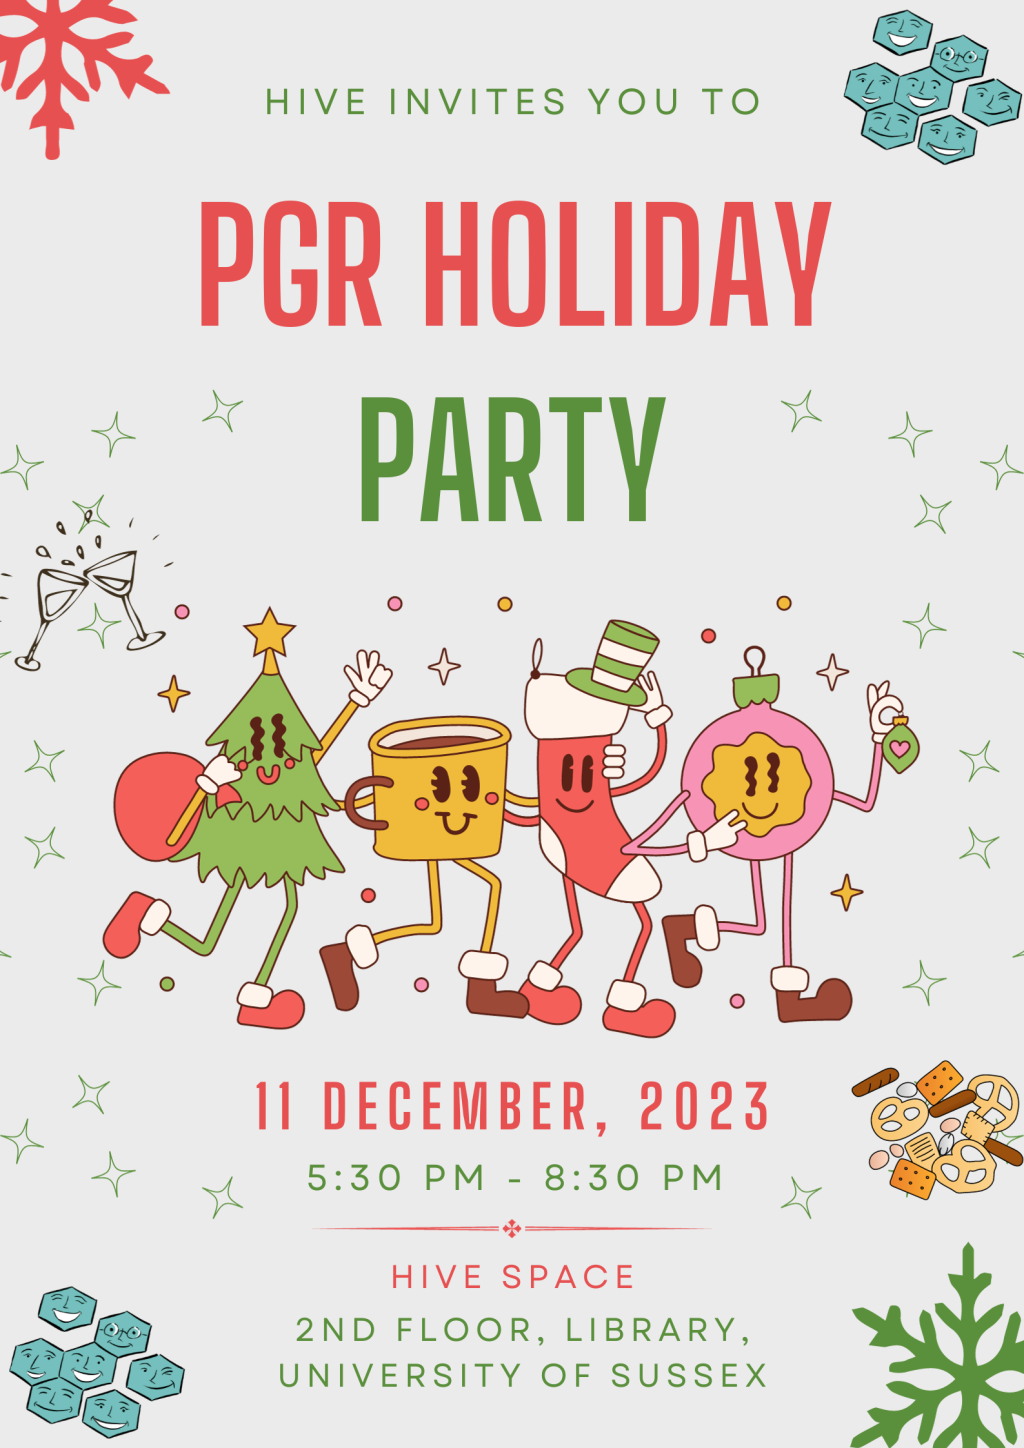 PGR Holiday party!